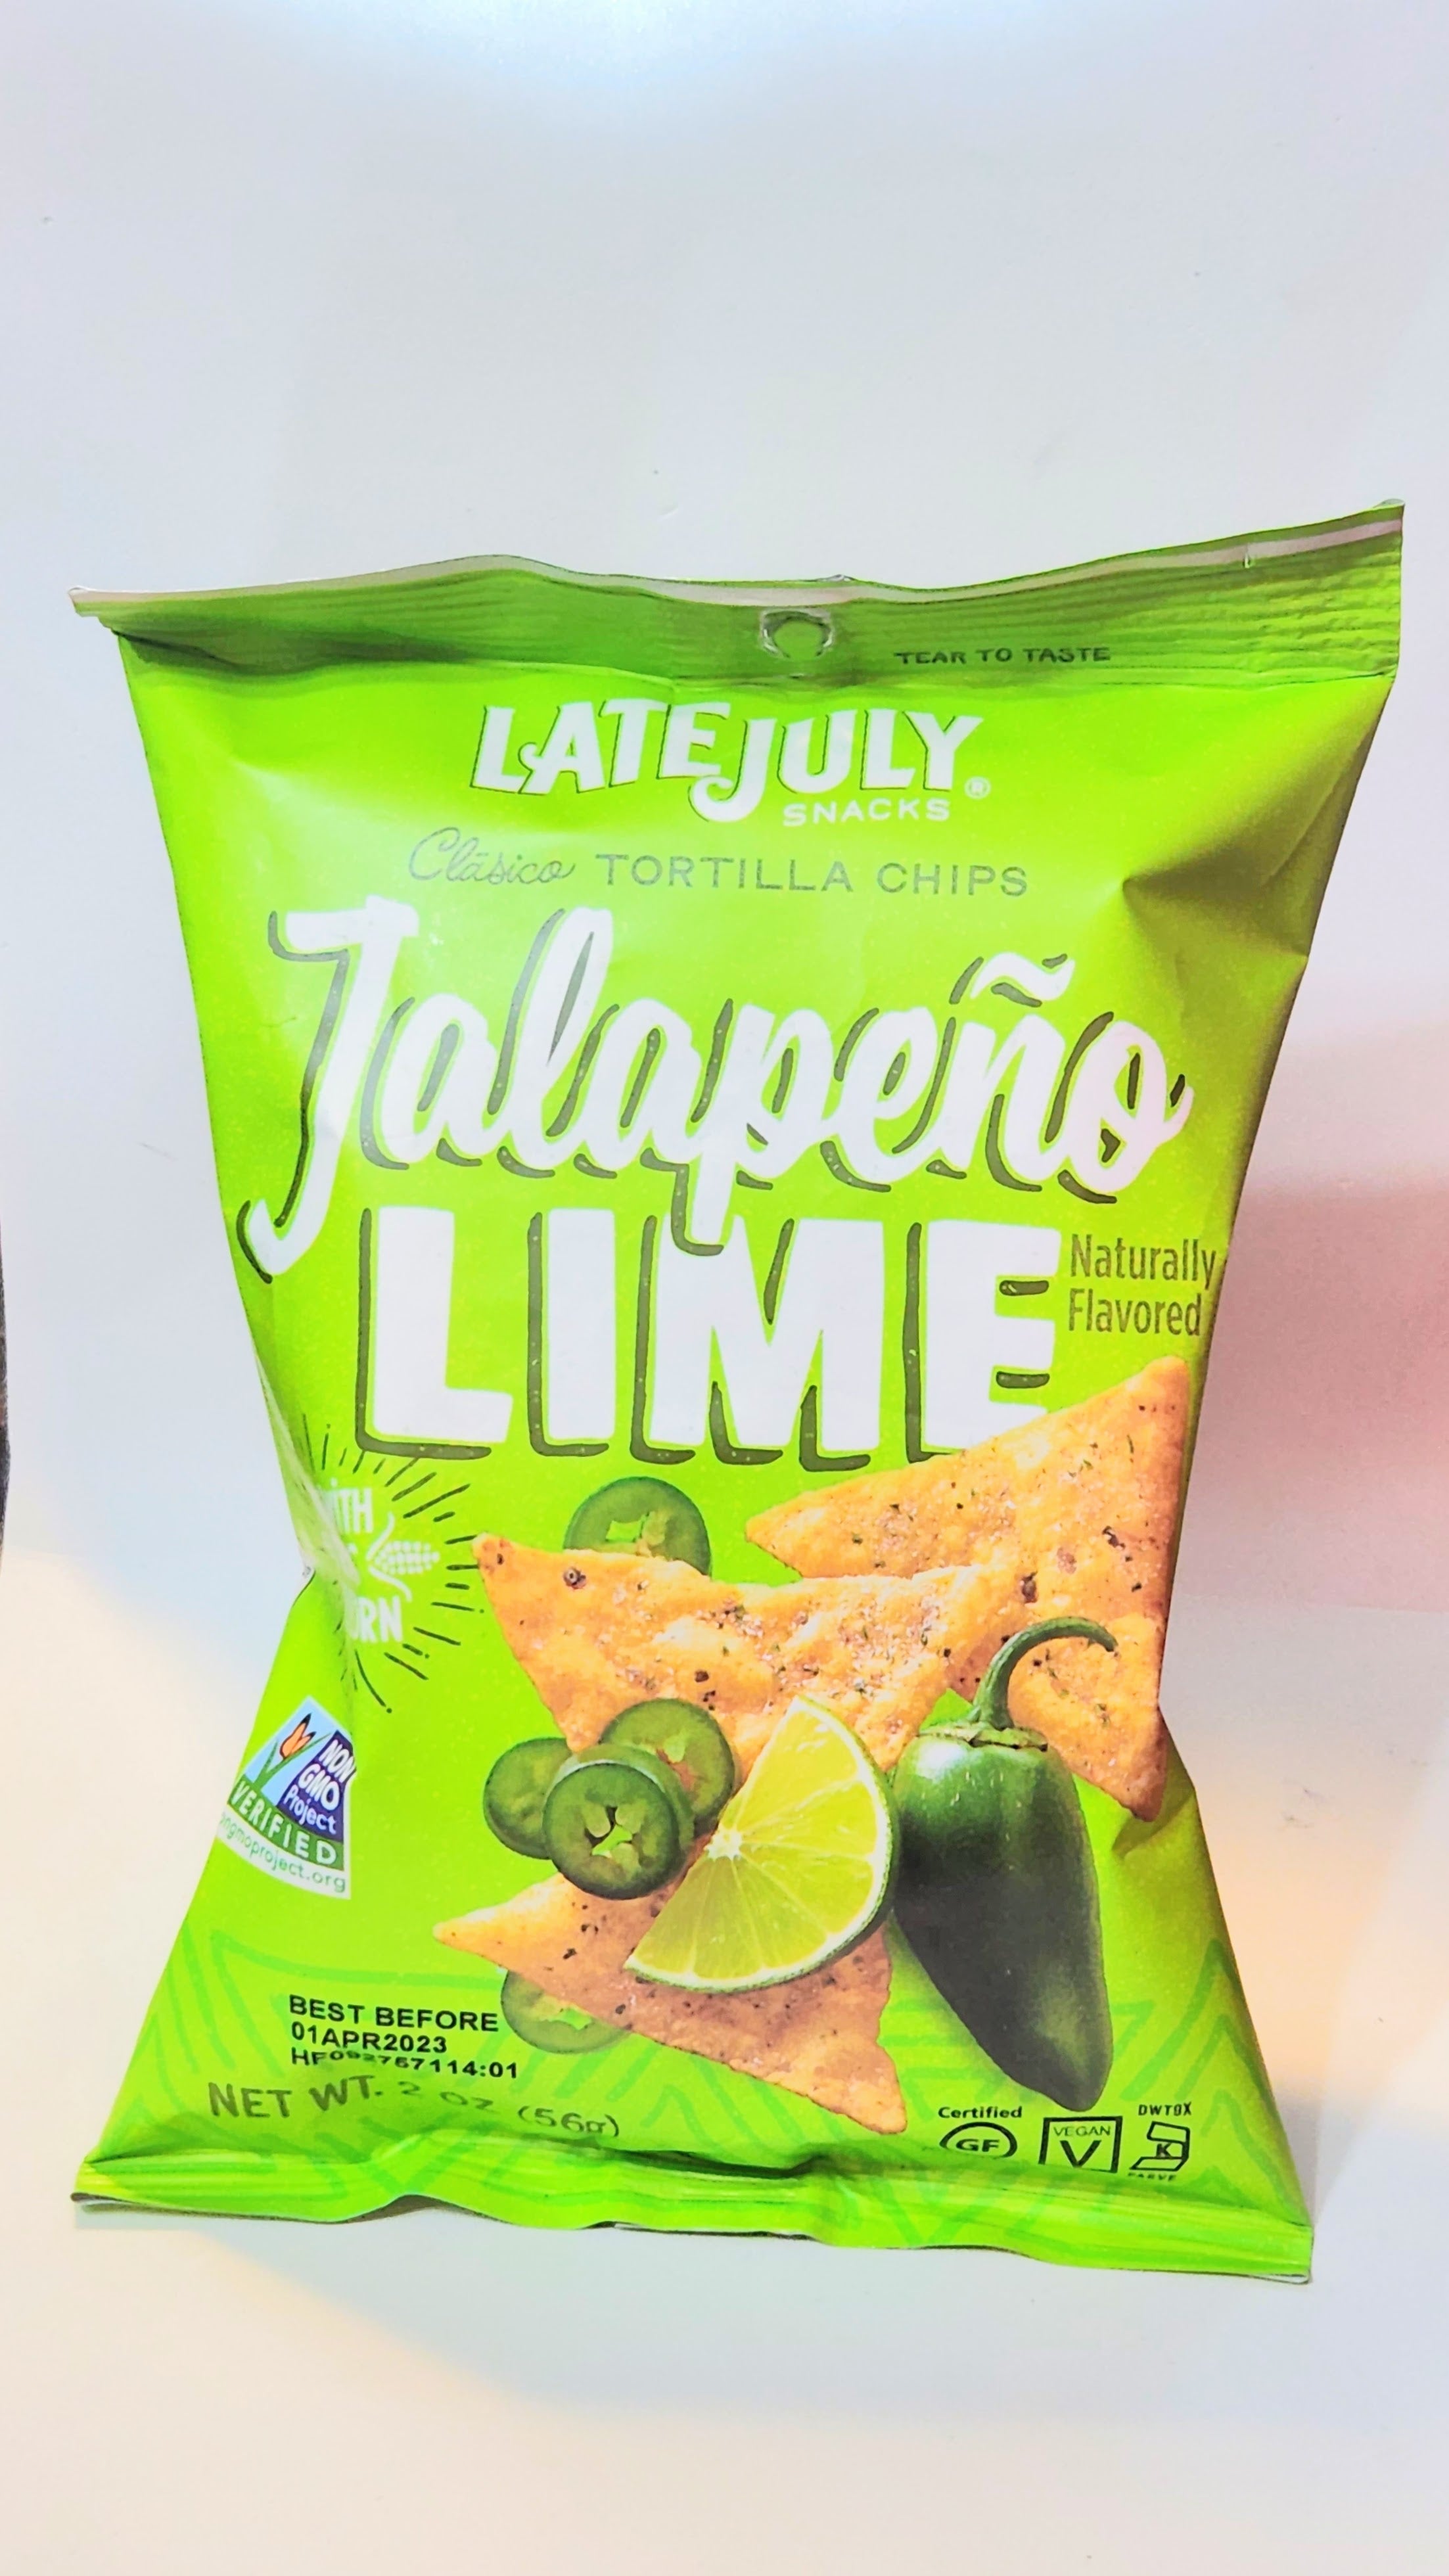 Jalapeno Lime Corn Chips are Naturally Flavored